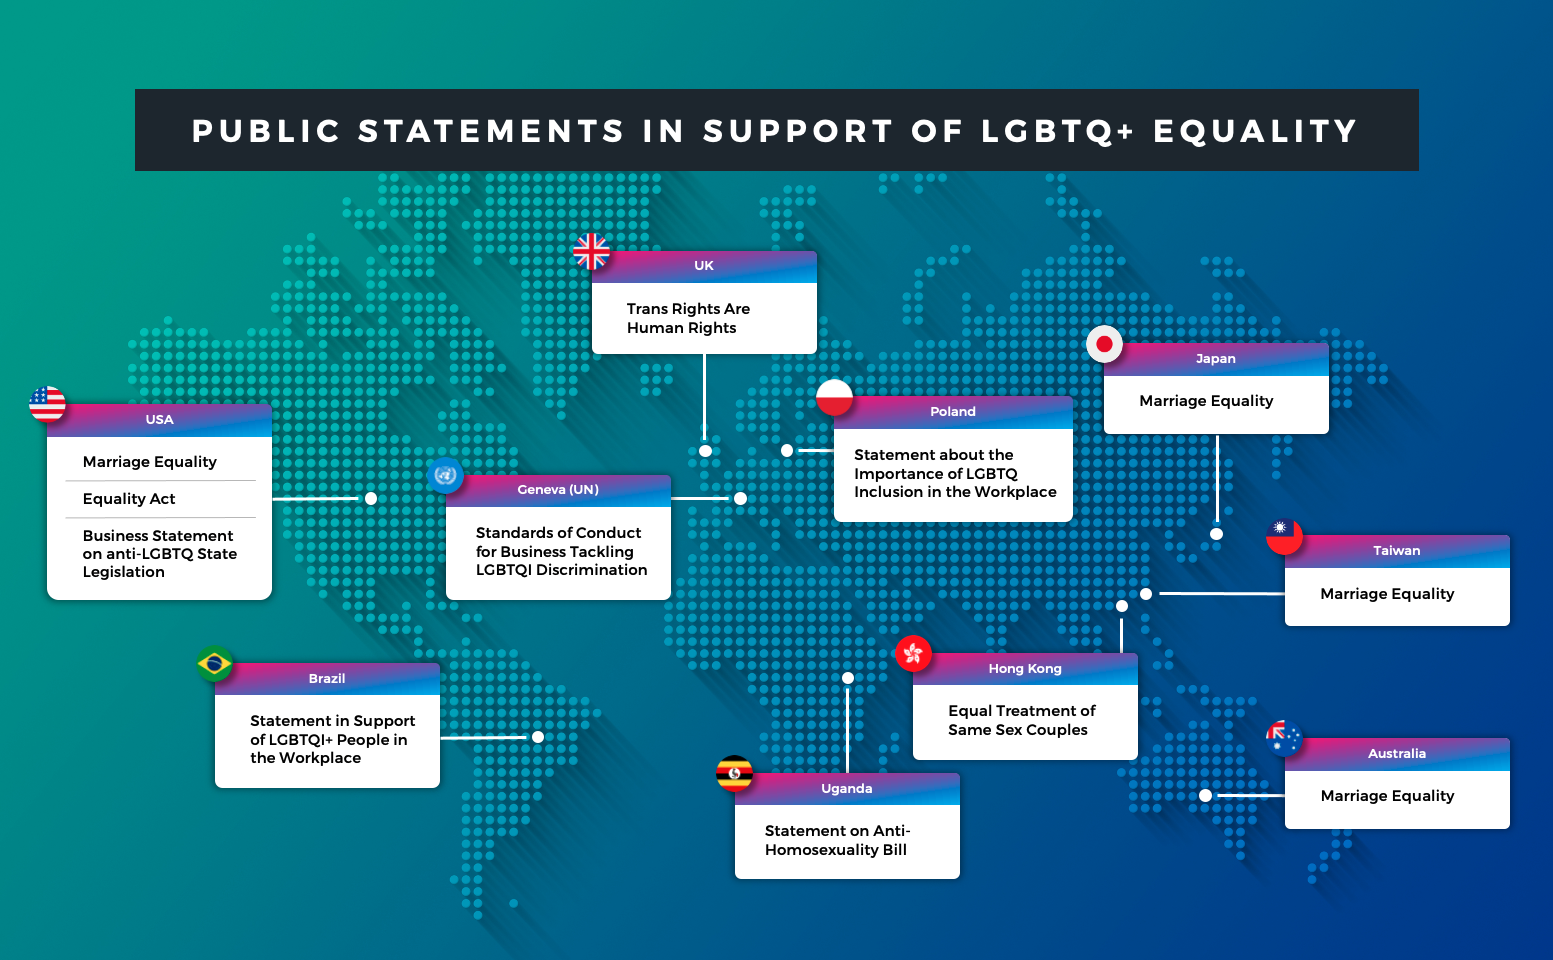 HR75_Public_Statements_In_Support_Of_LGBTQ_Equality